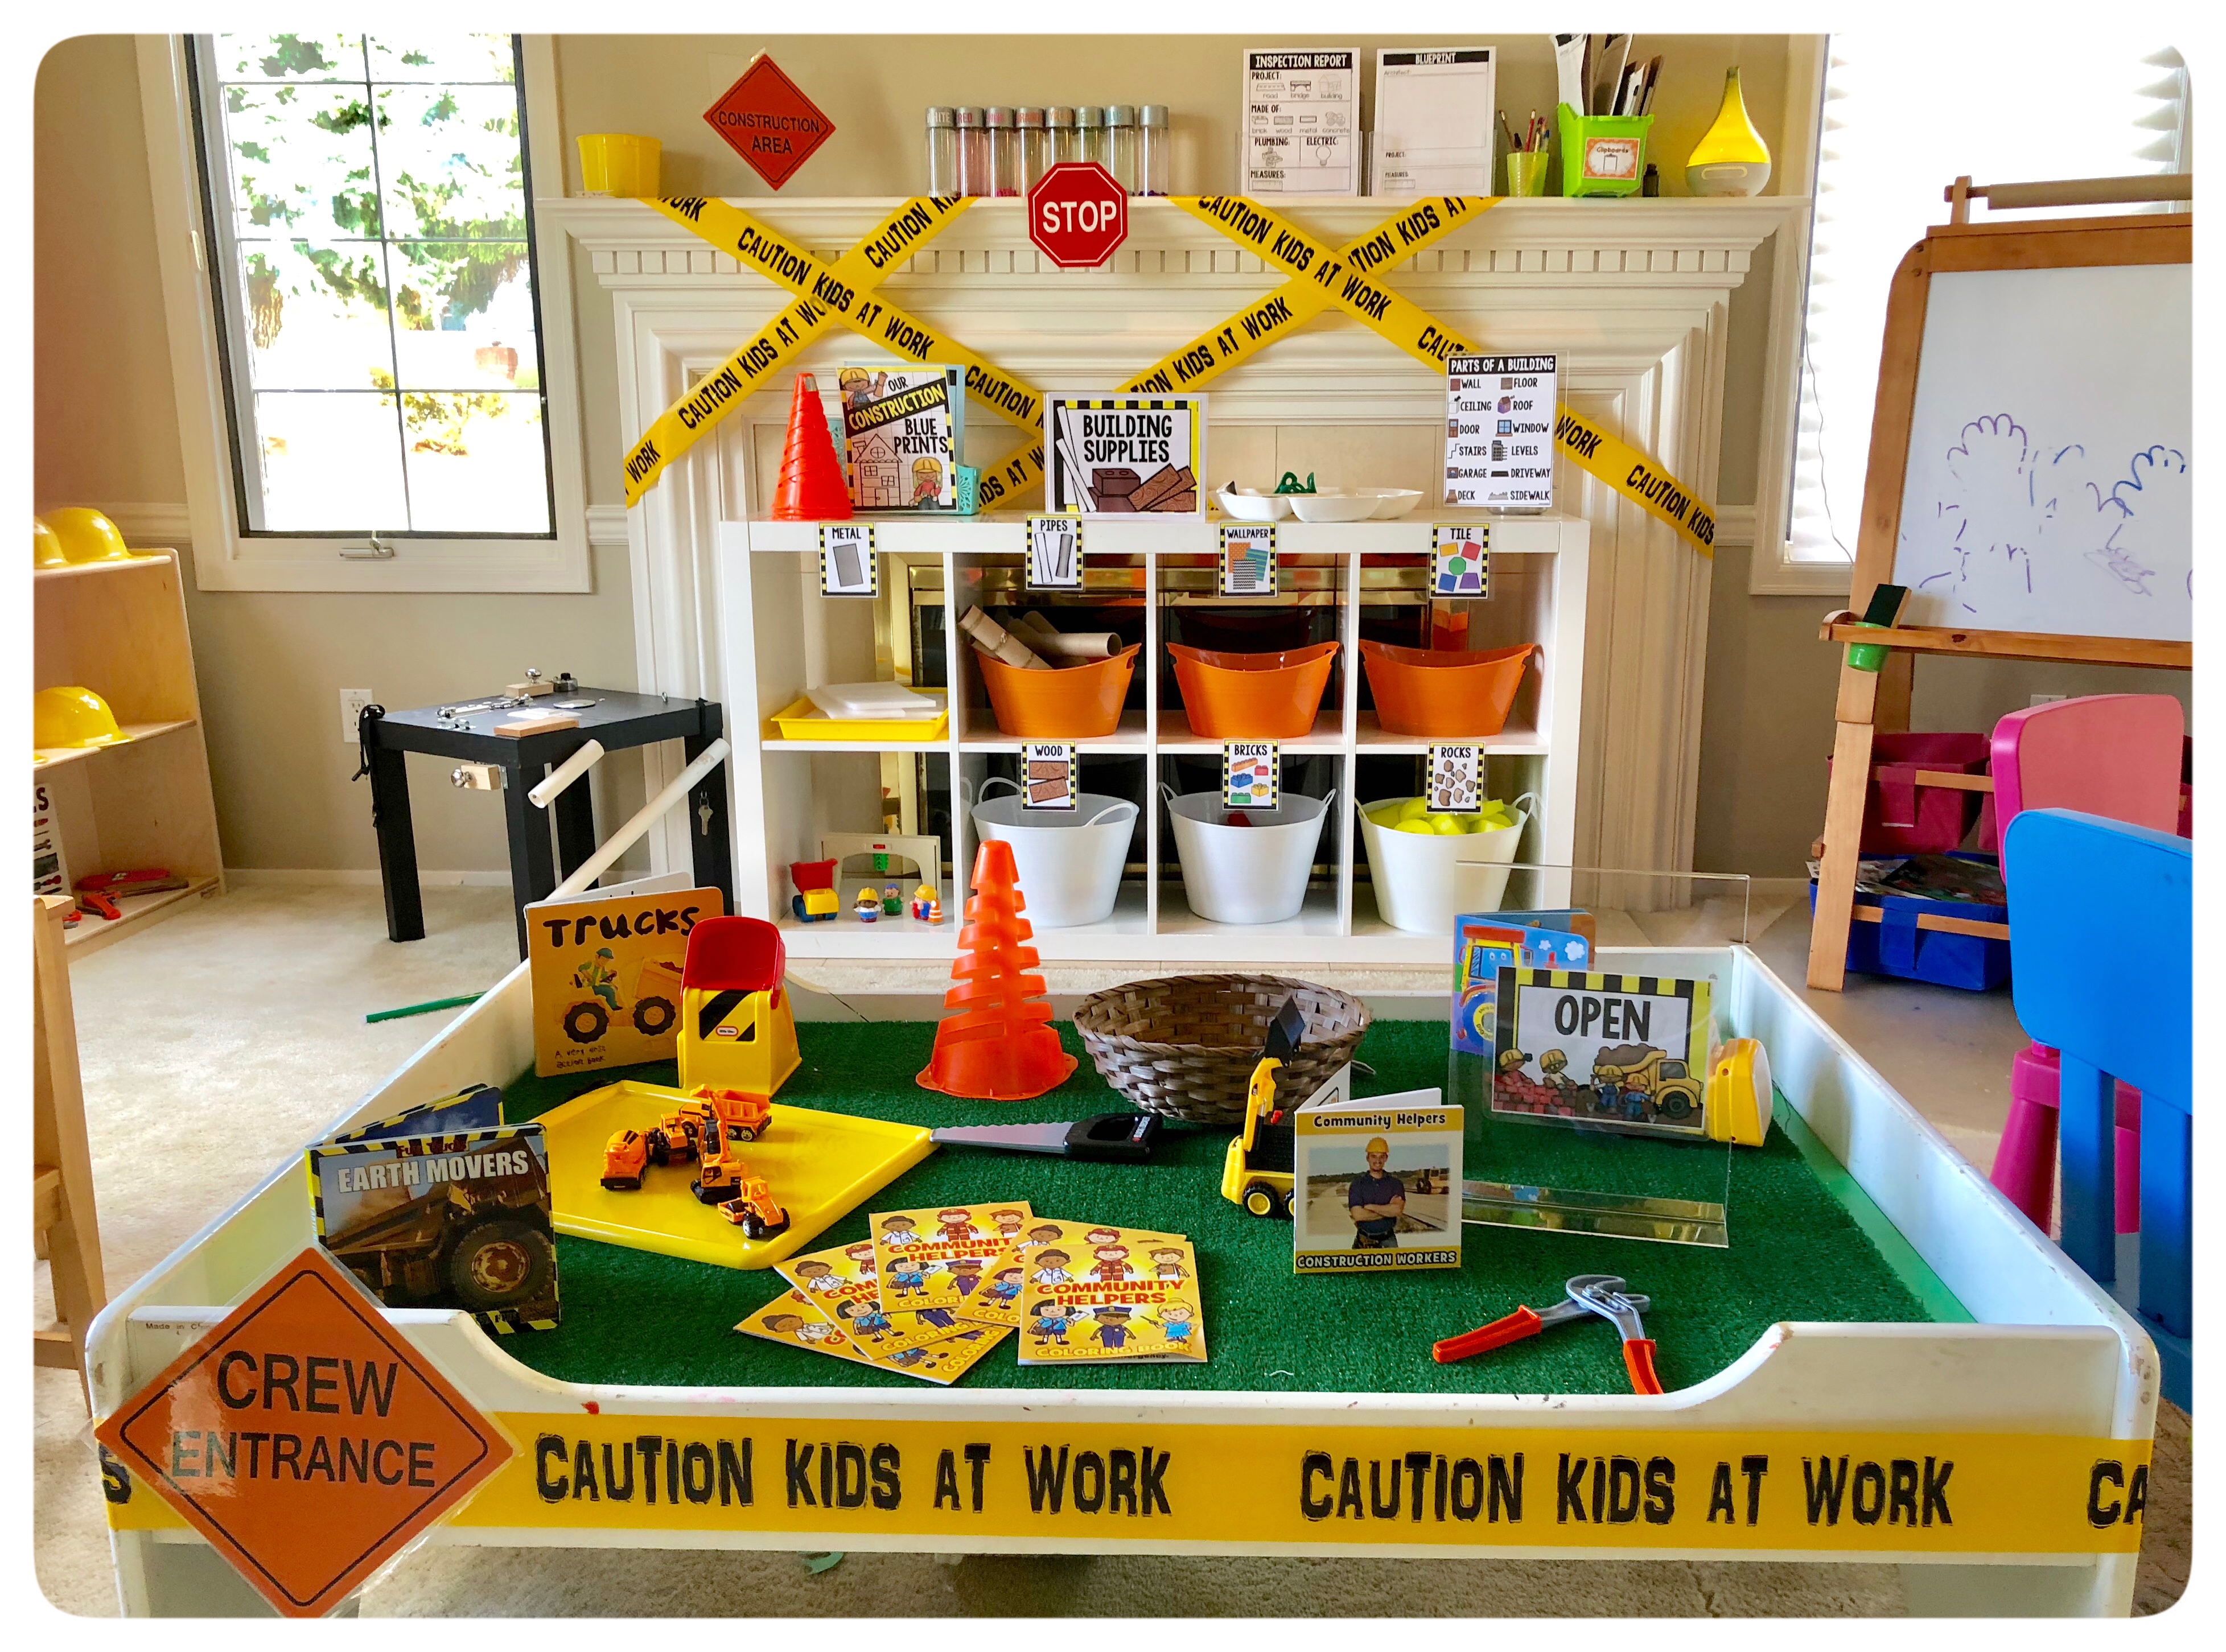 Construction Site!  We will be building math, literacy, science, and social skills during our pretend play.
Play is powerful! Learning through play creates meaningful learning opportunities.